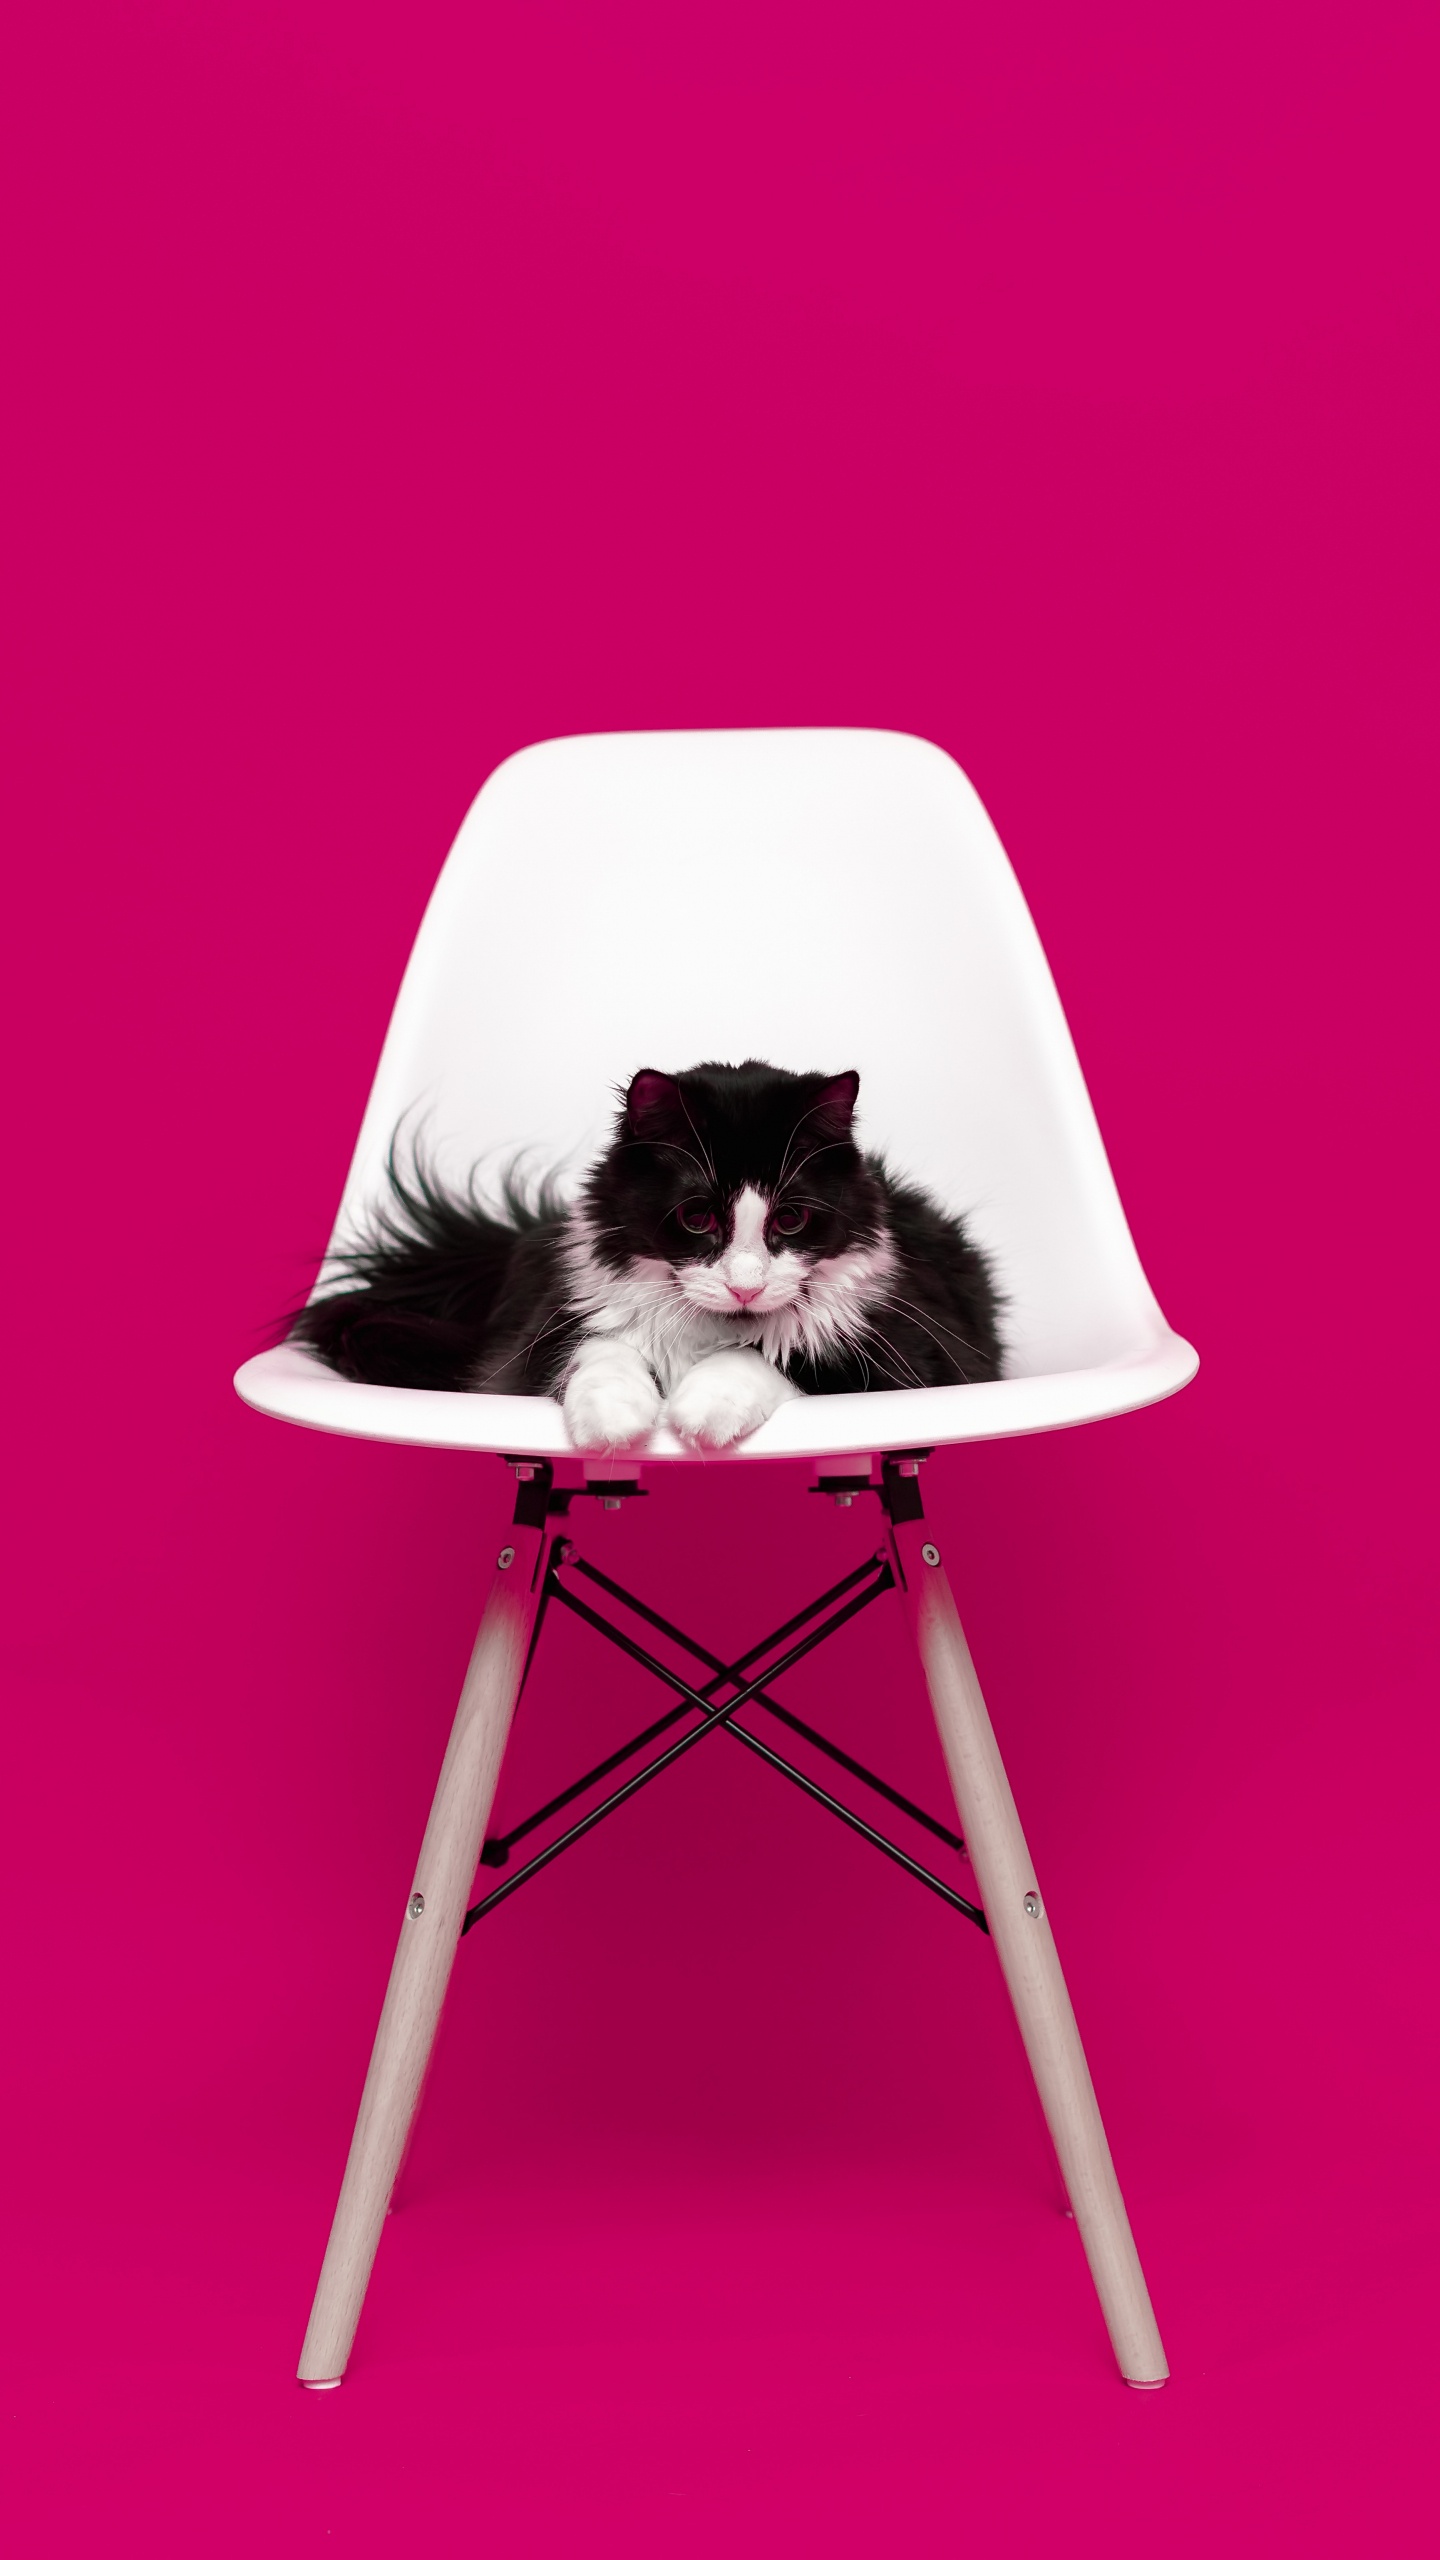 Black and White Cat on White Chair. Wallpaper in 1440x2560 Resolution